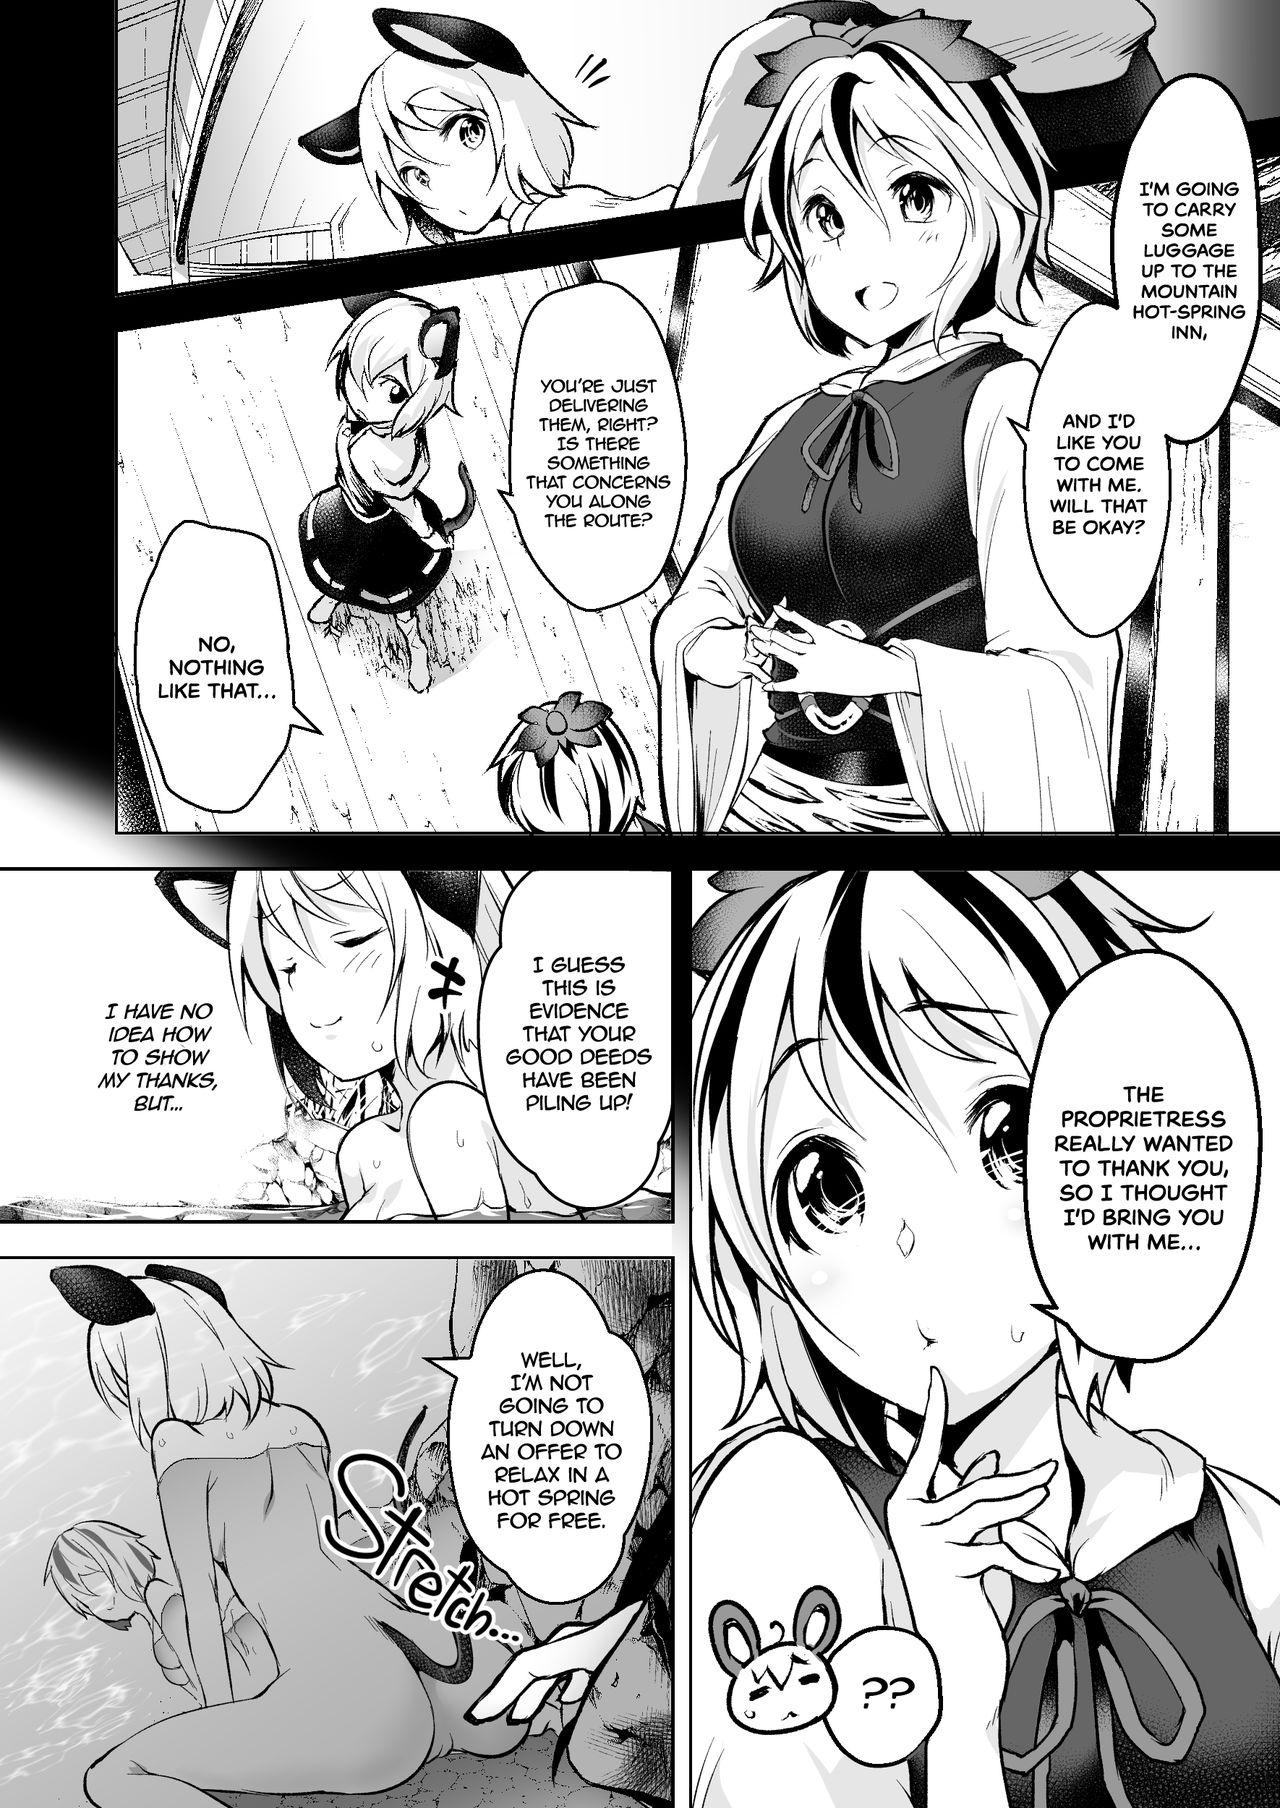 Body Fucking with Portals - Touhou project Nice - Page 6